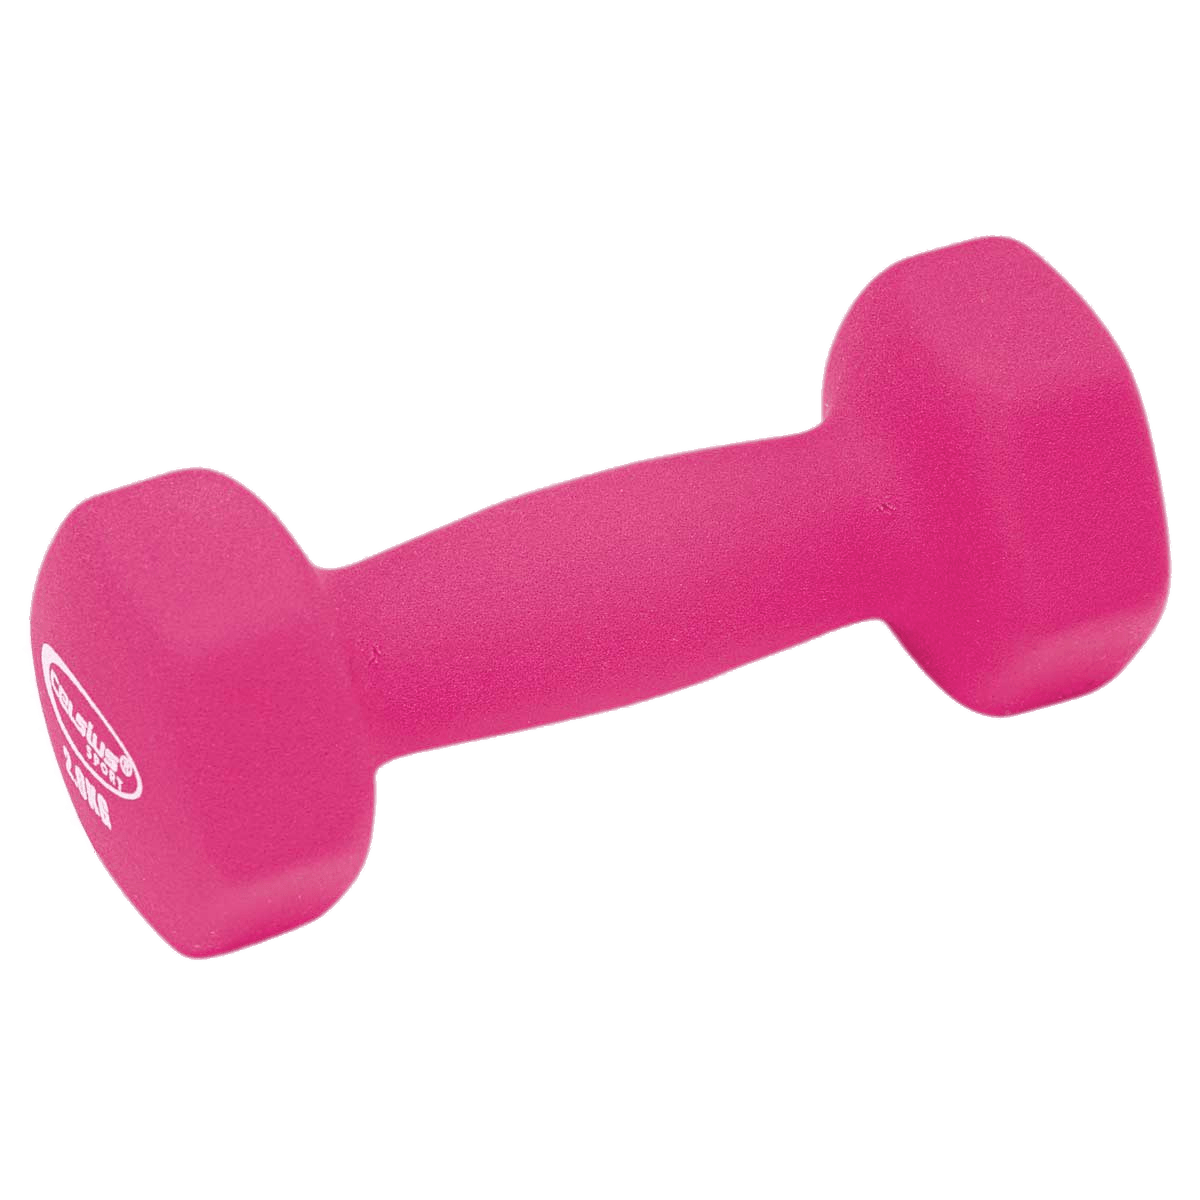 Exercise clipart dumbell. Pink dumbbell transparent png